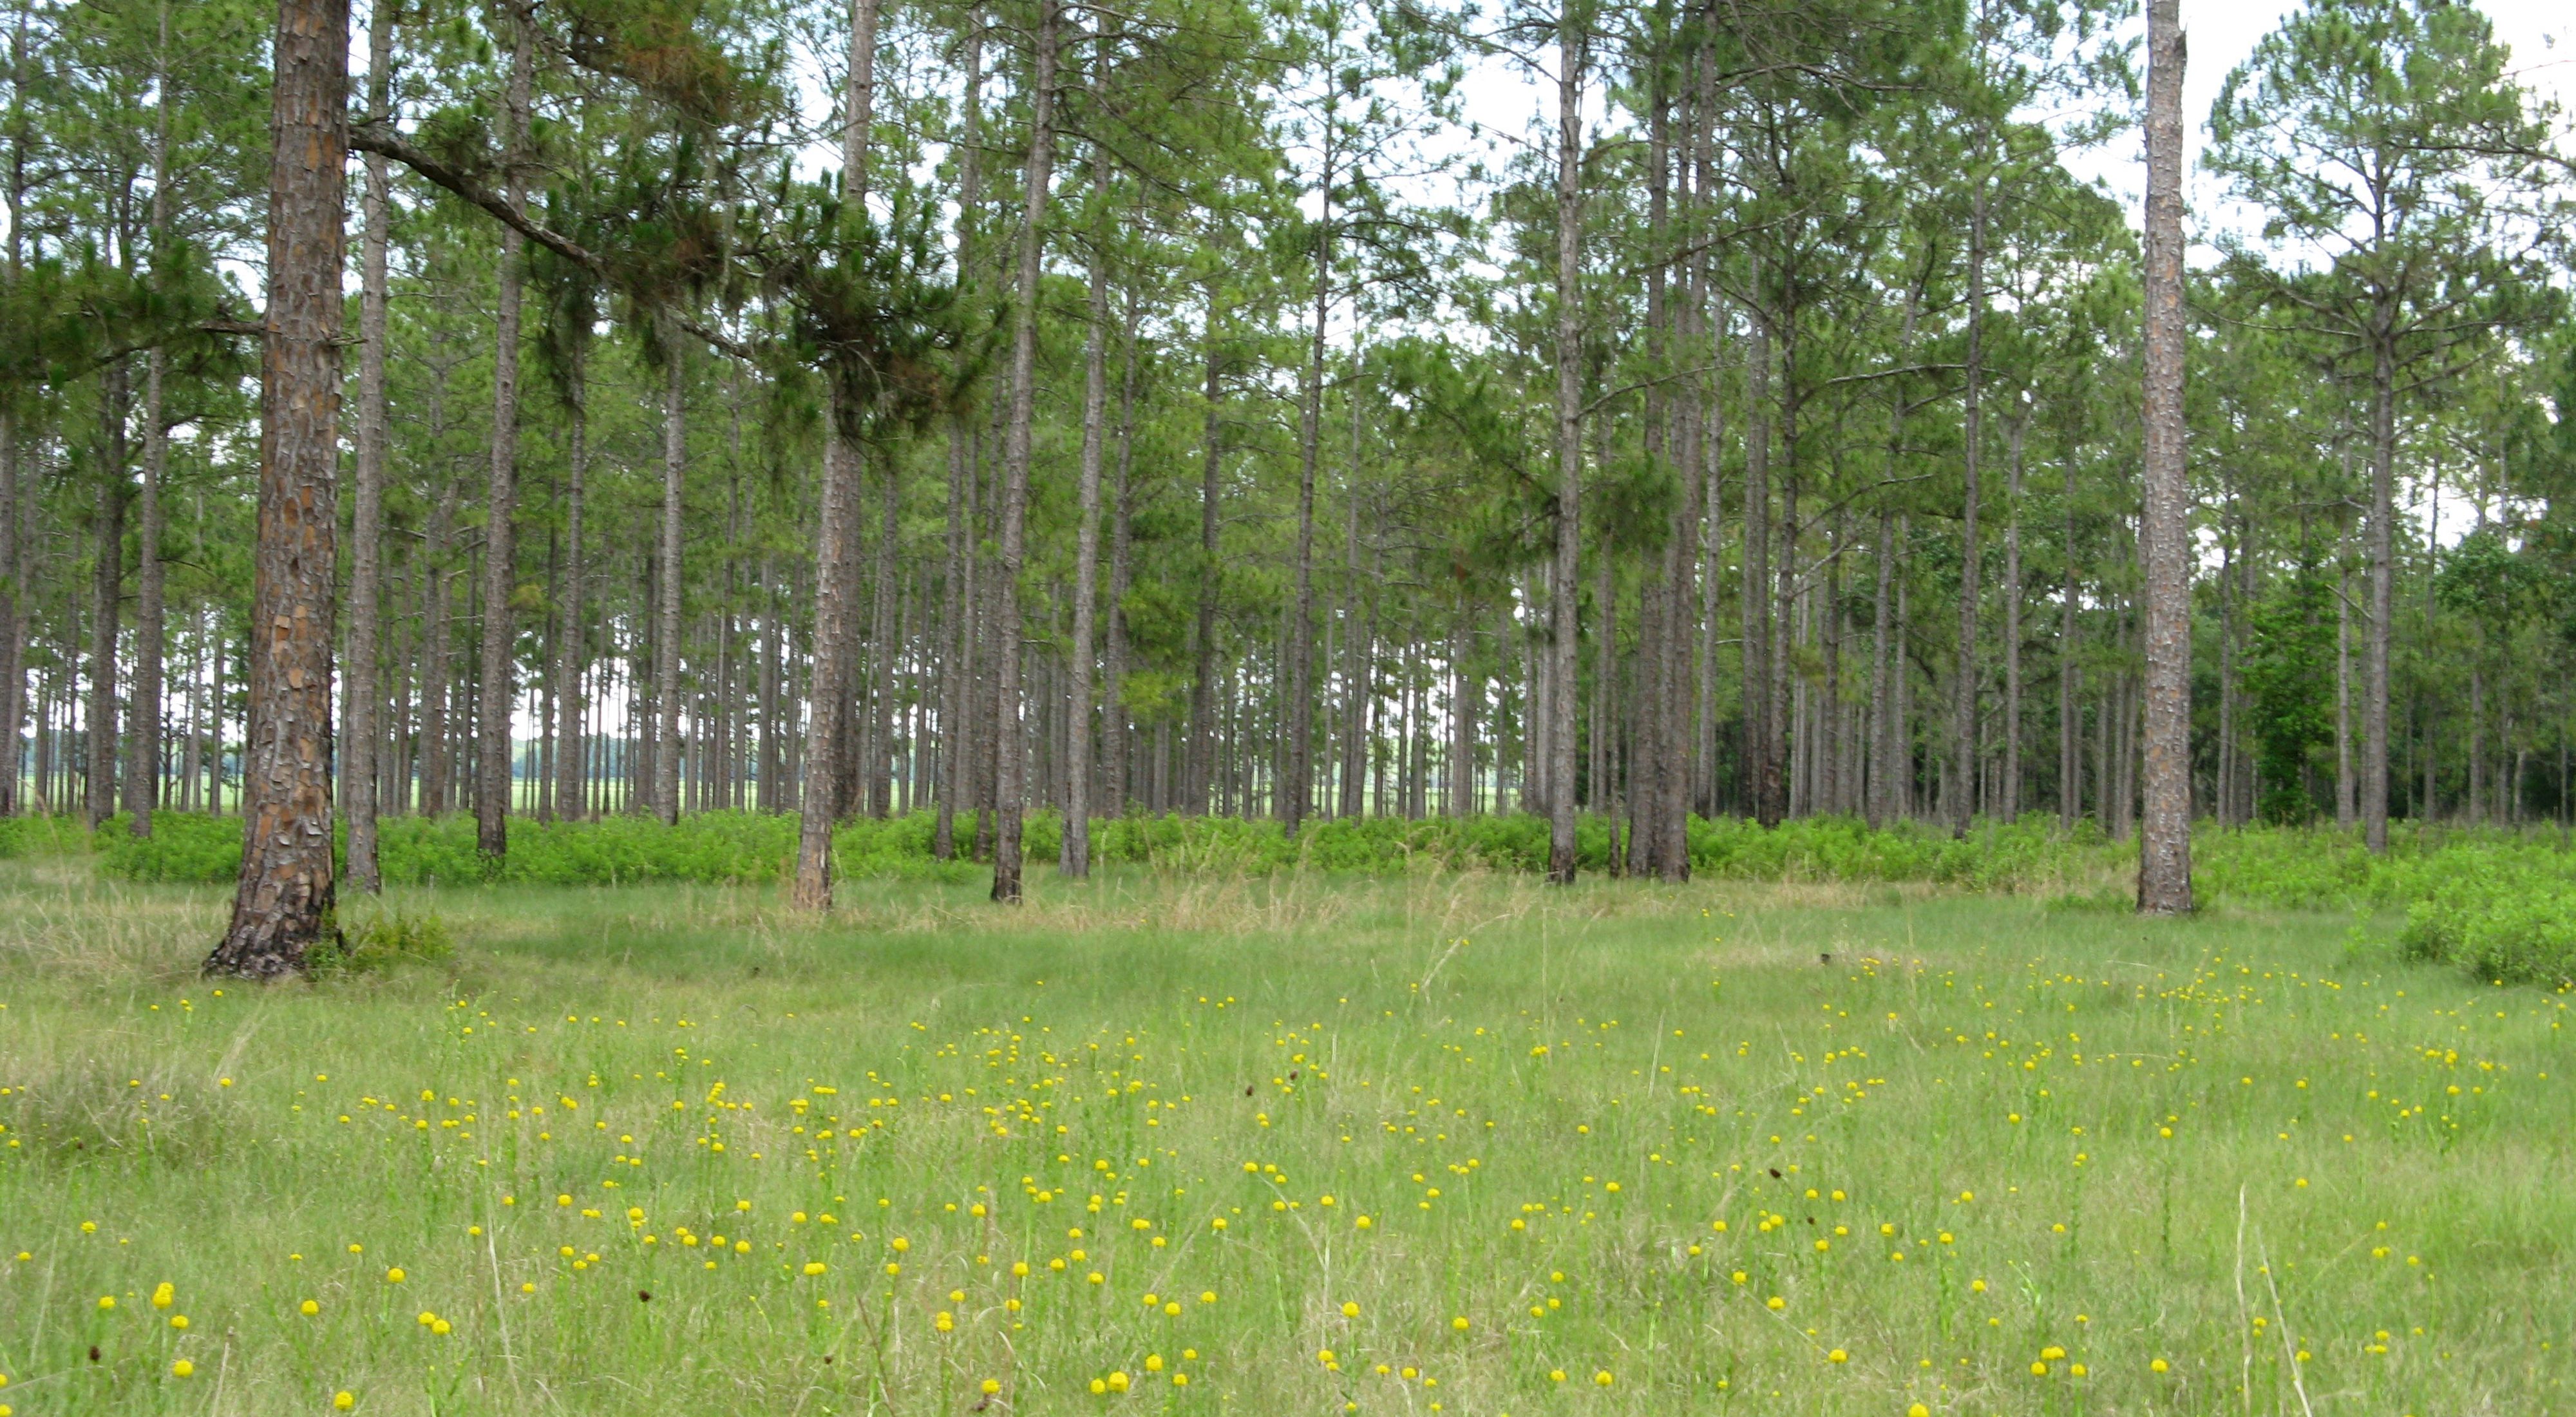 Pine trees on a grassy plain dotted with yellow flowers.